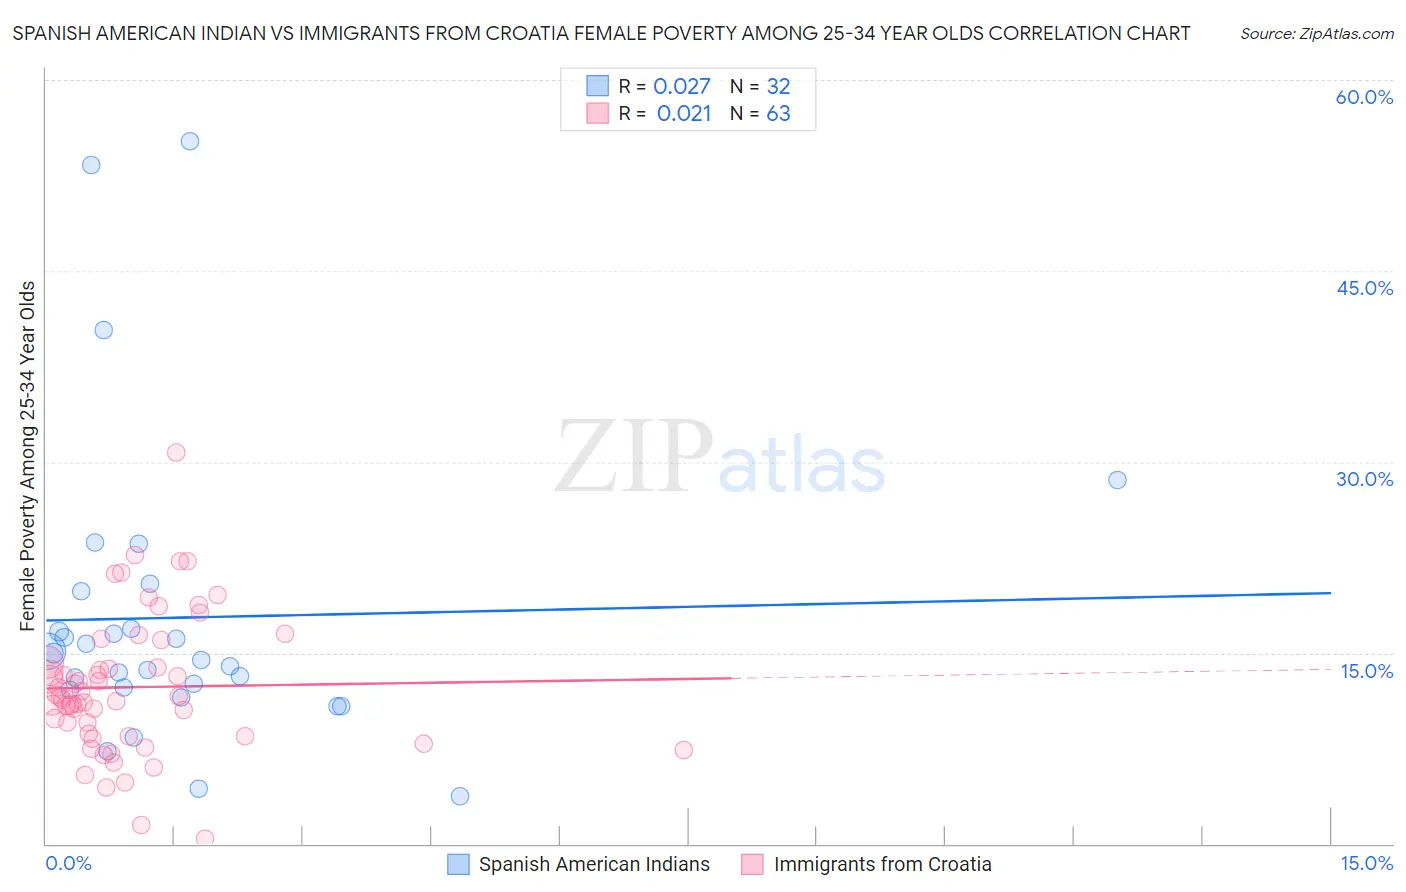 Spanish American Indian vs Immigrants from Croatia Female Poverty Among 25-34 Year Olds